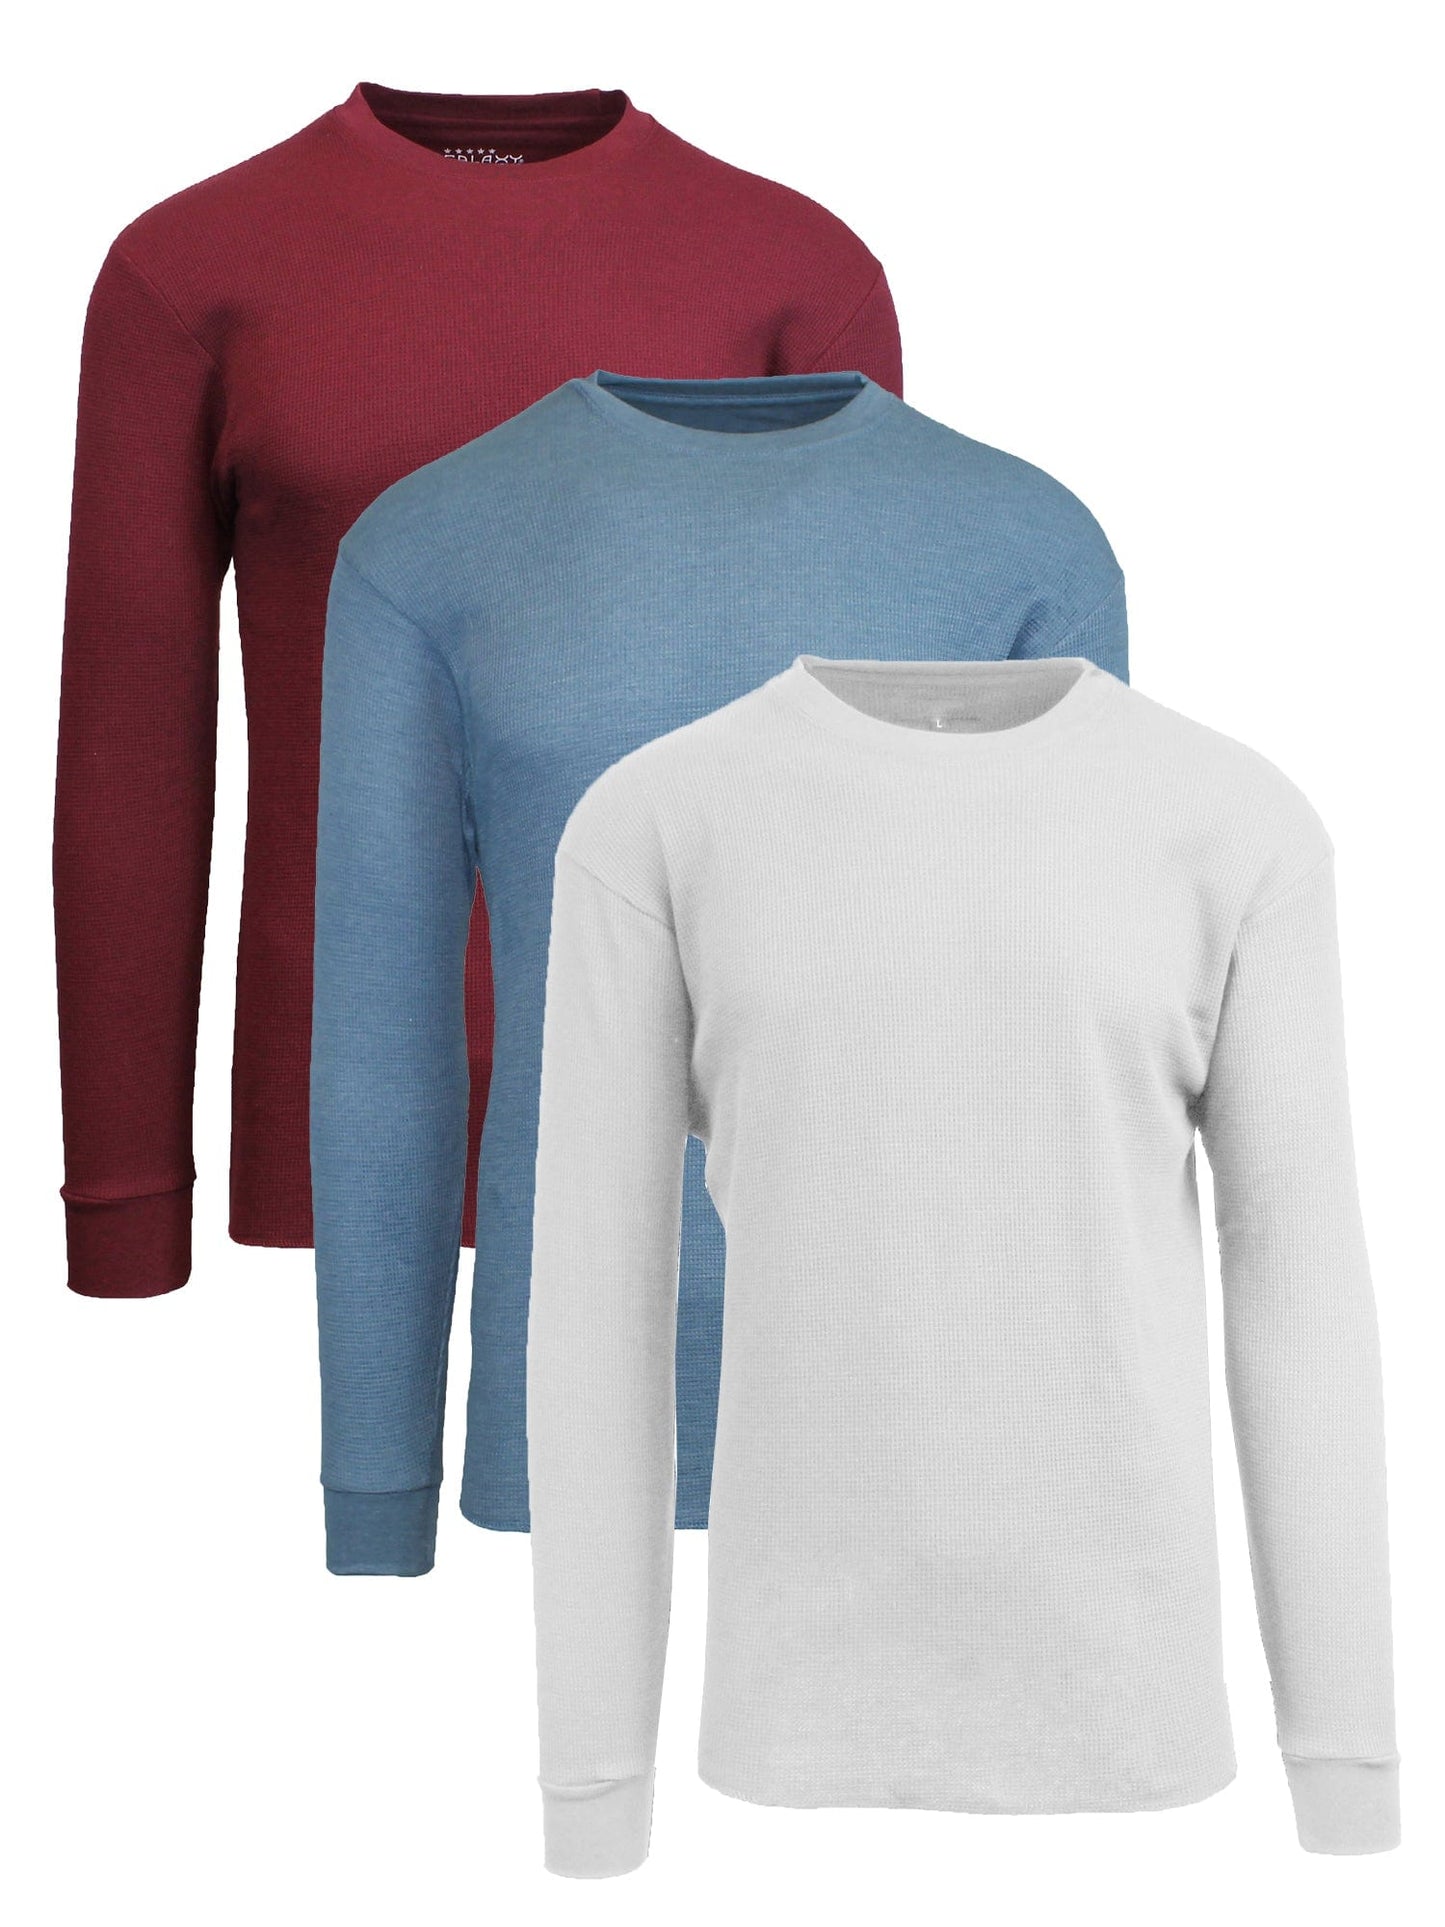 Men's Long Sleeve Thermal Shirts (3-Pack) - GalaxybyHarvic